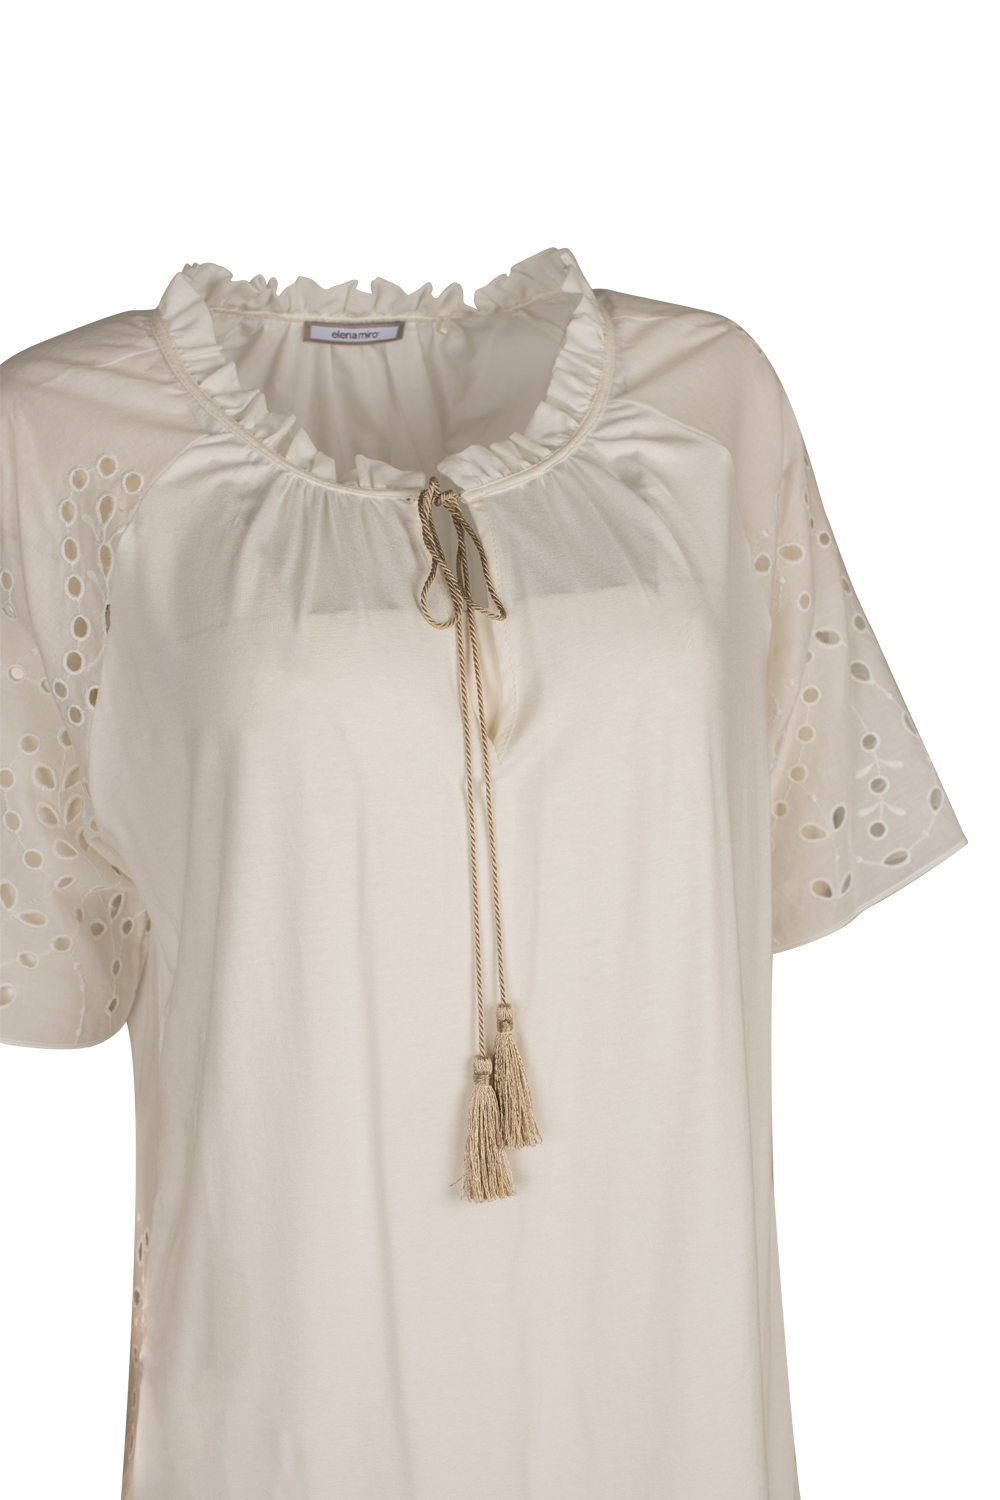 Openwork Peasant Blouse with Frilled Neck Tying and Tassels